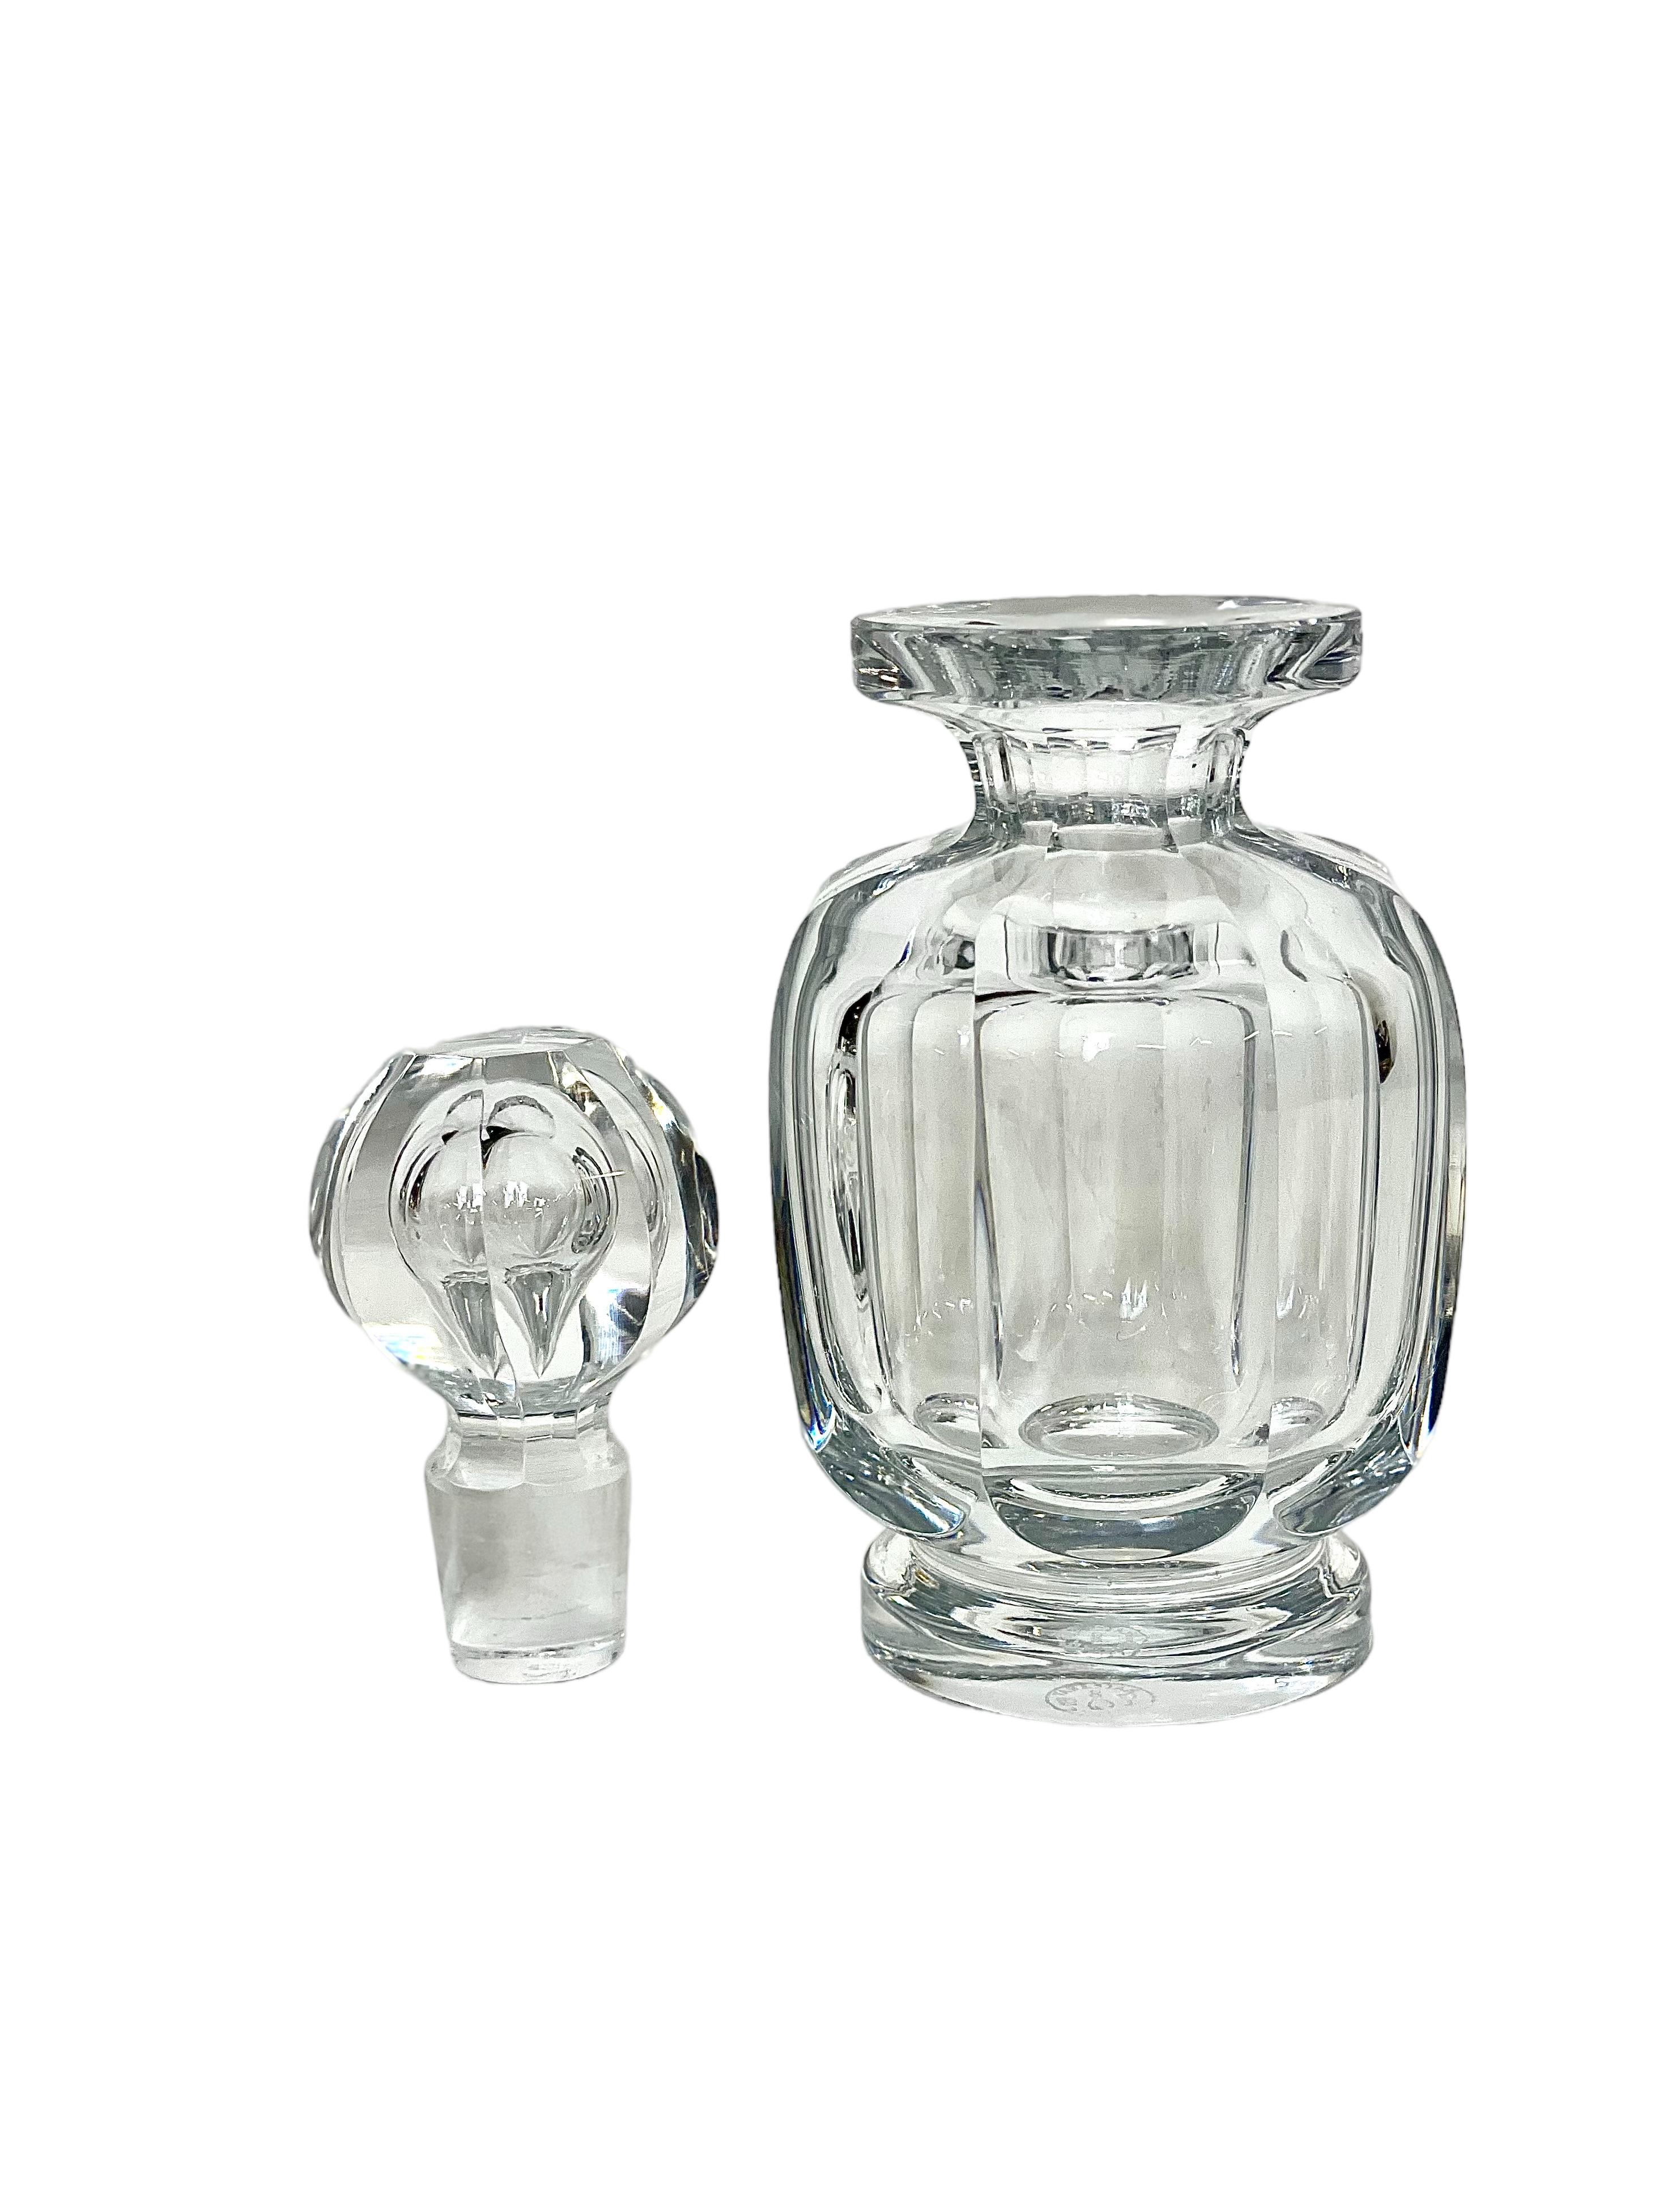 A beautifully shaped 1940s Art Deco Baccarat crystal bottle, with a multi-faceted octagonal stopper, originally designed to grace a stylish mid-century dressing table. At just over 15cm in height, this elegant little bottle would make a stunning